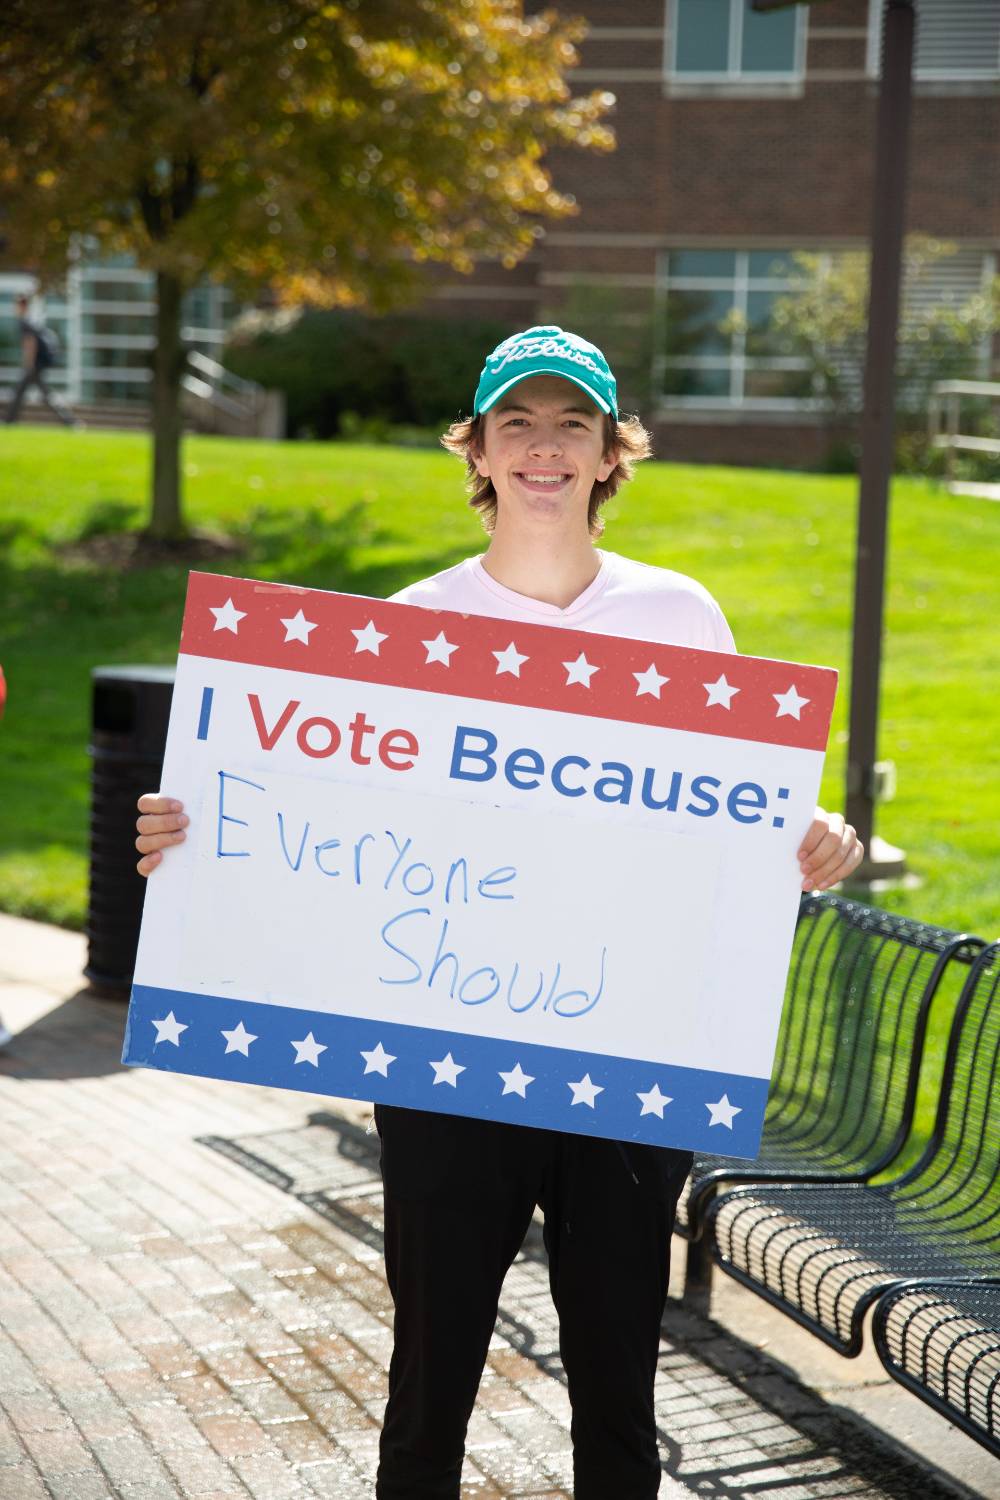 Student holding sign titled "I vote because: Everyone should"